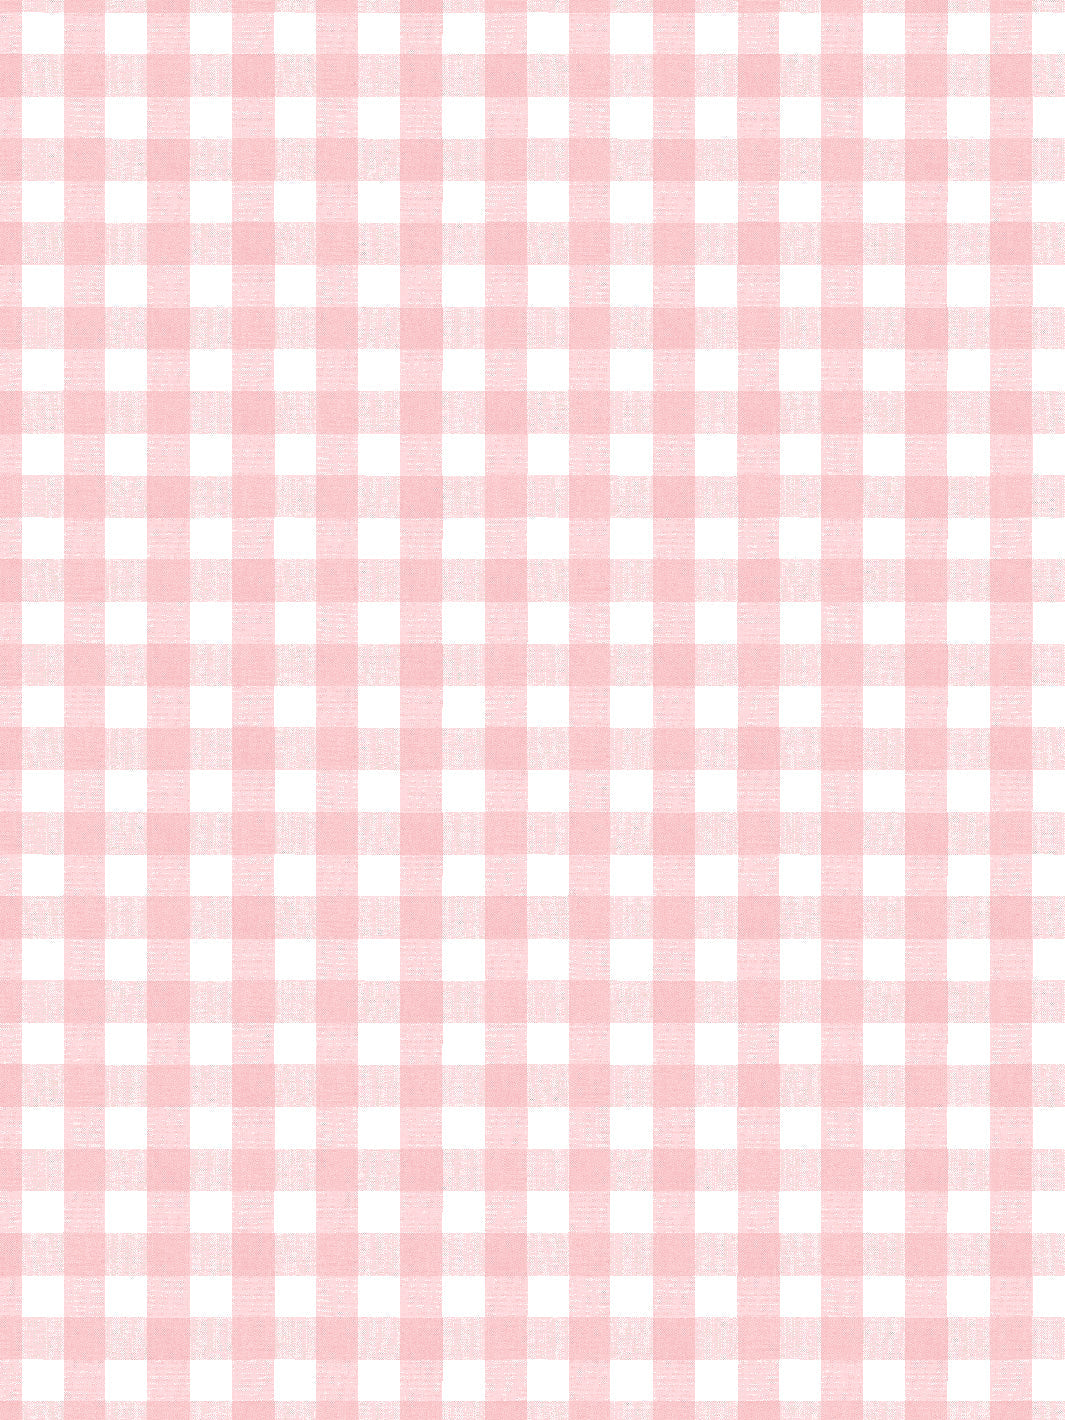 'Pixie Gingham' Wallpaper by Sarah Jessica Parker - Pink